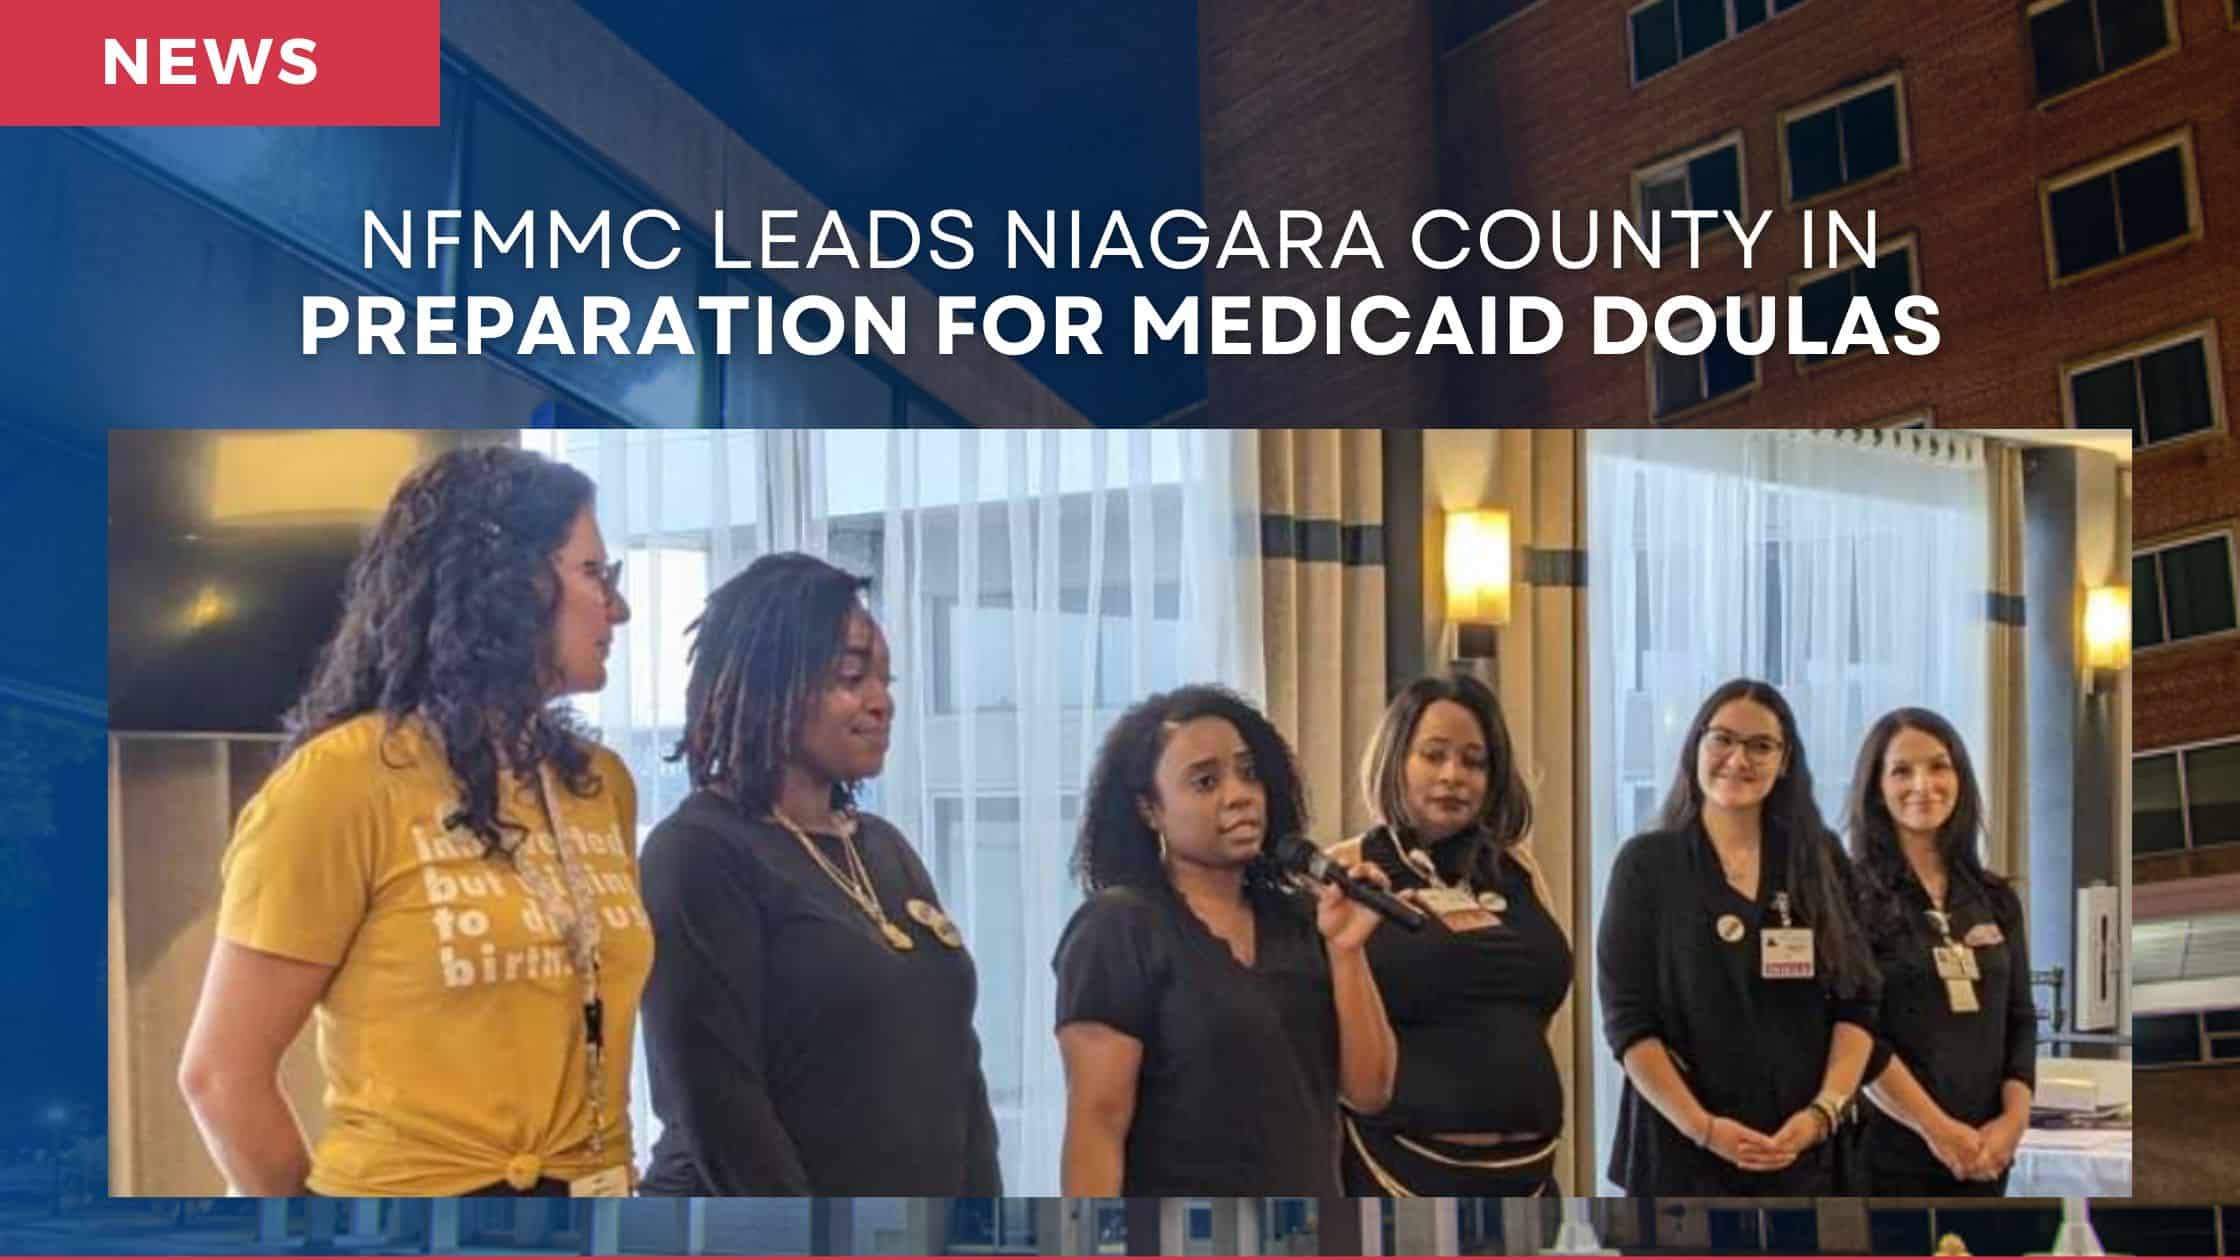 NFMMC Leads Niagara County in Preparation for Medicaid Doulas